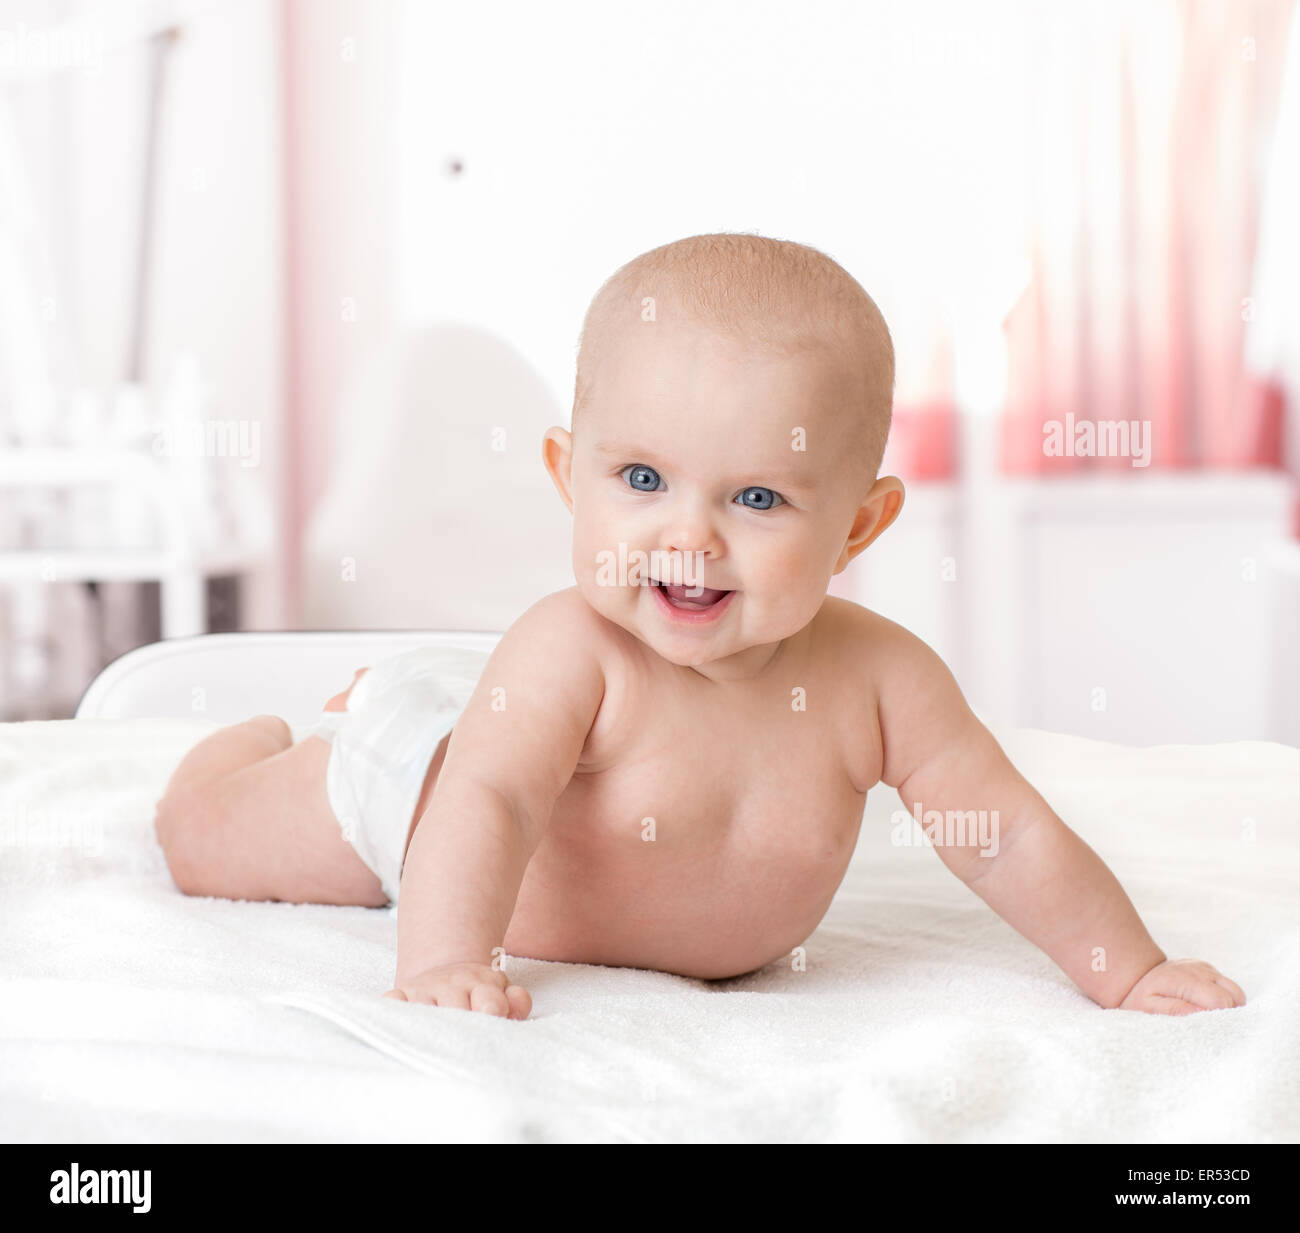 healthy happy baby lying on bed Stock Photo